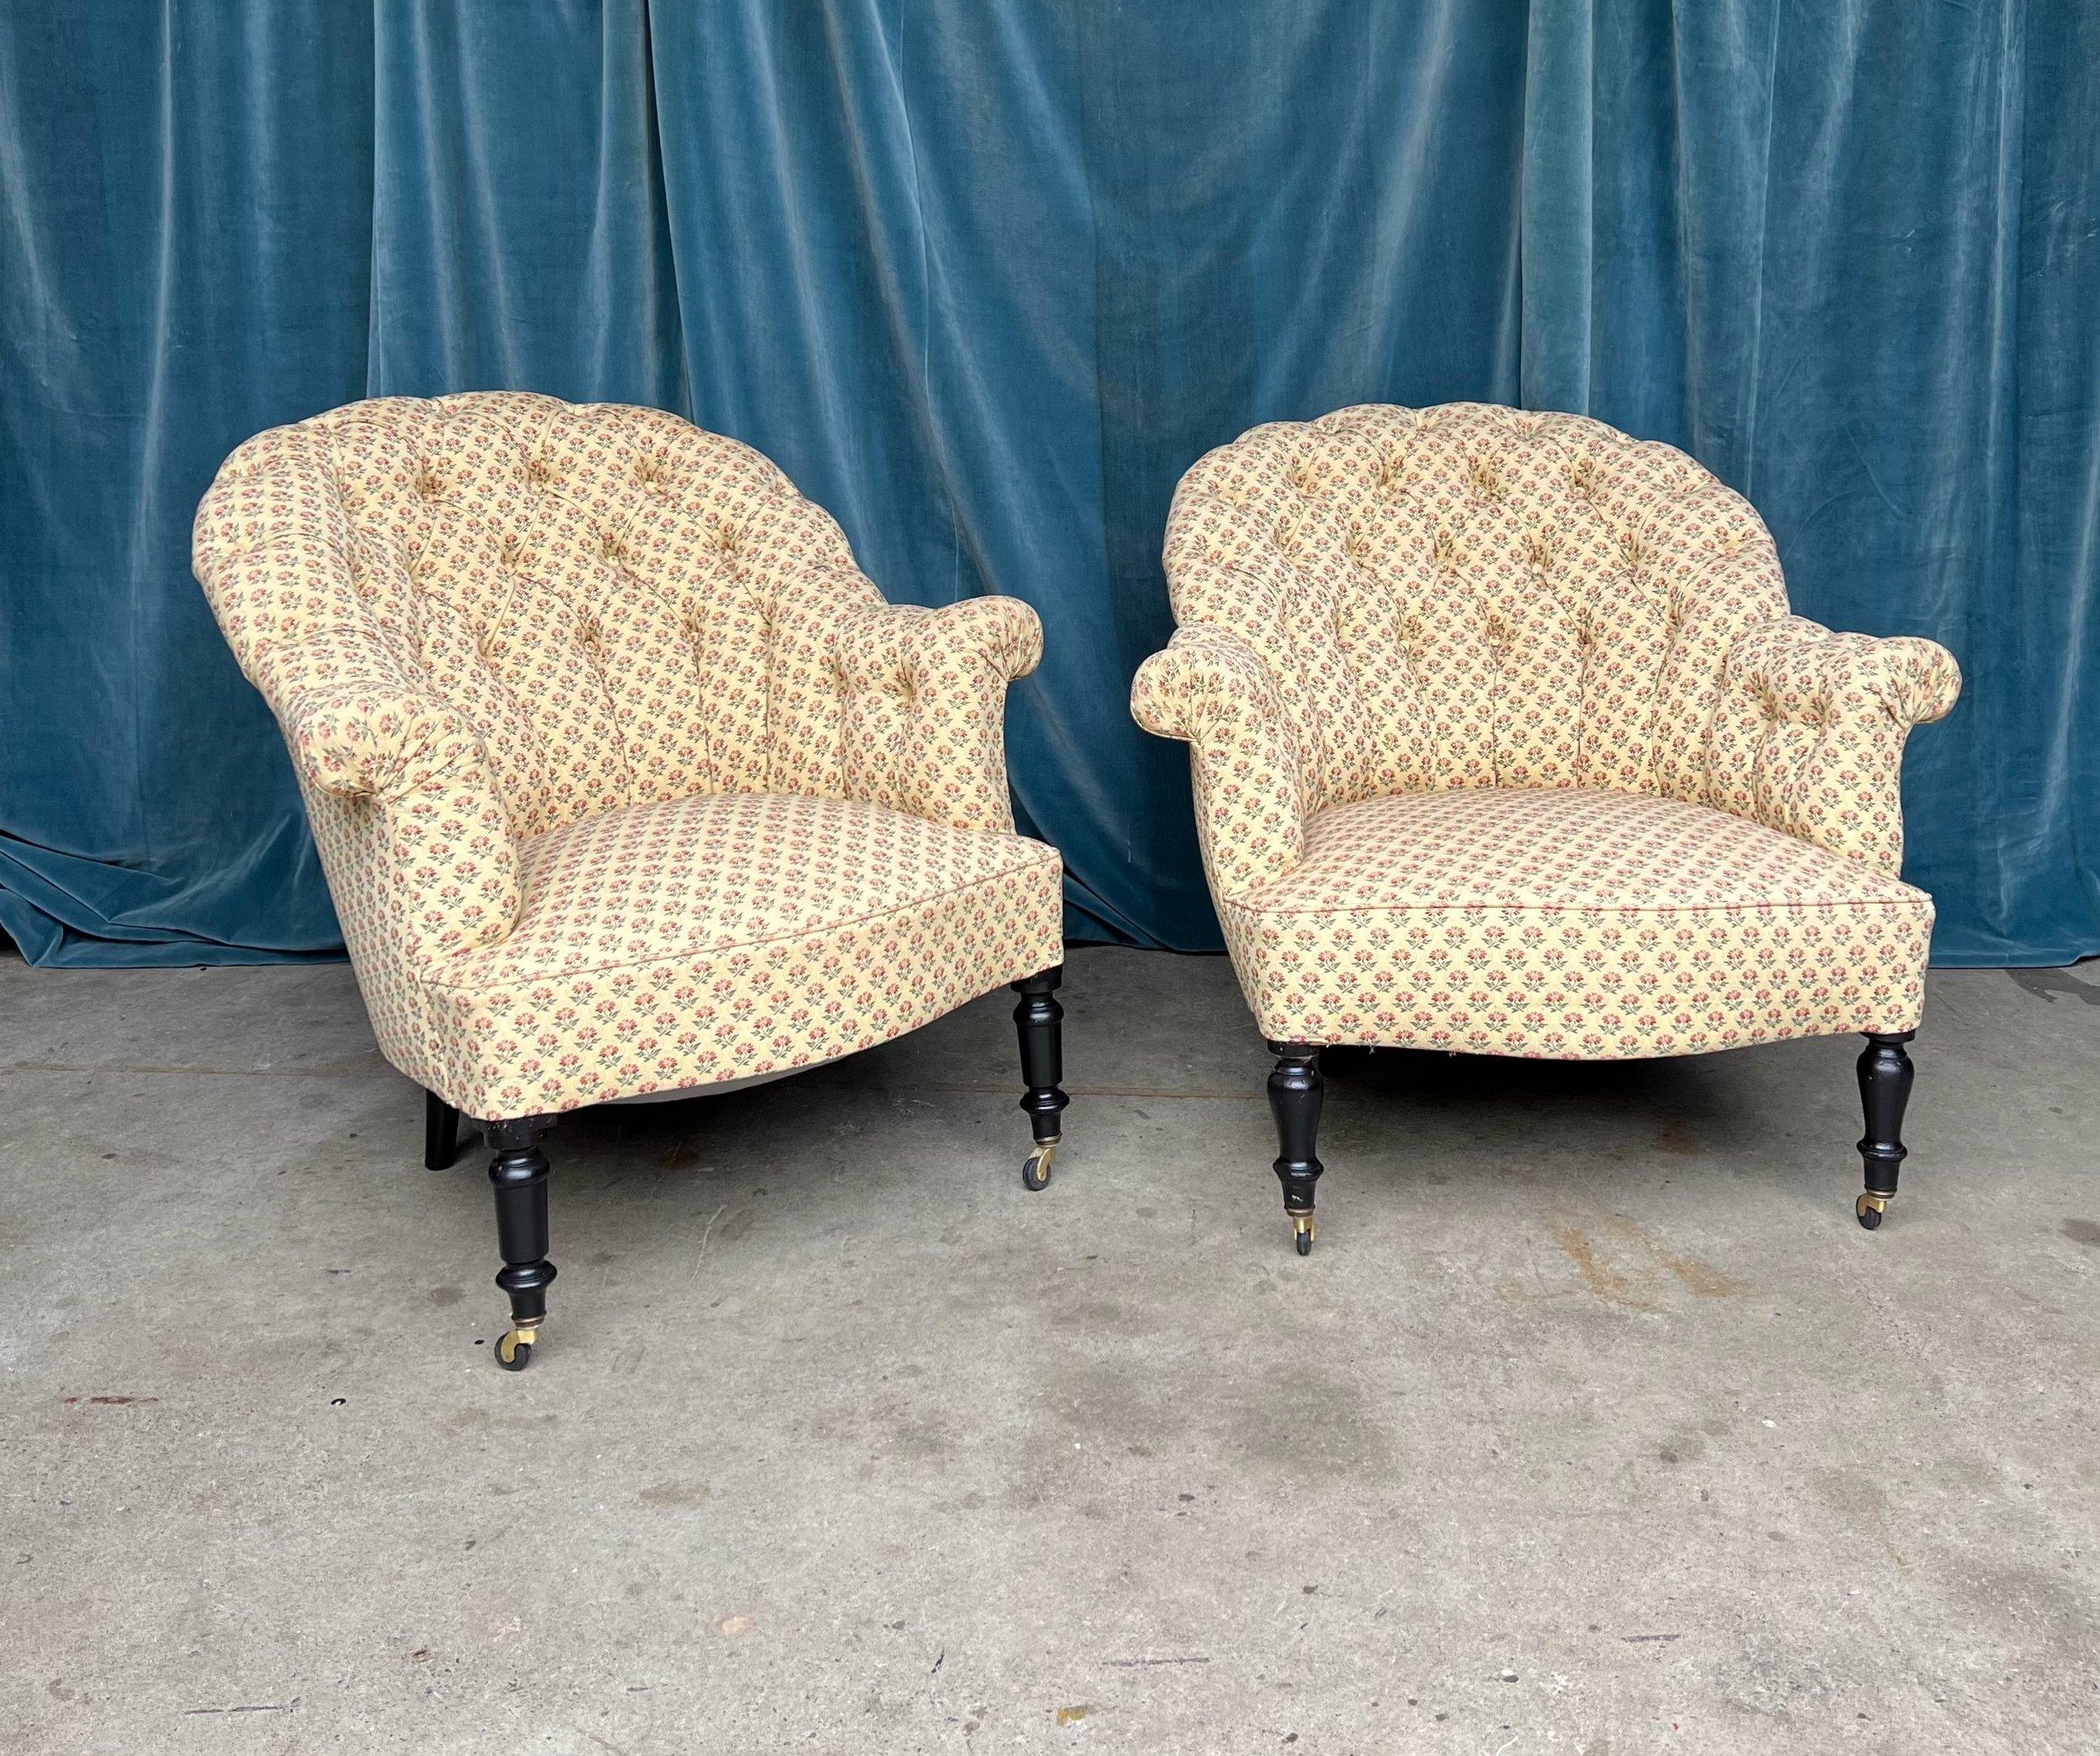 An elegant pair of 19th century Napoleon III tufted armchairs from France. The pair is upholstered in vintage floral fabric but would look amazing recovered in a modern updated fabric of your choice. The rounded backs are tufted and complemented by